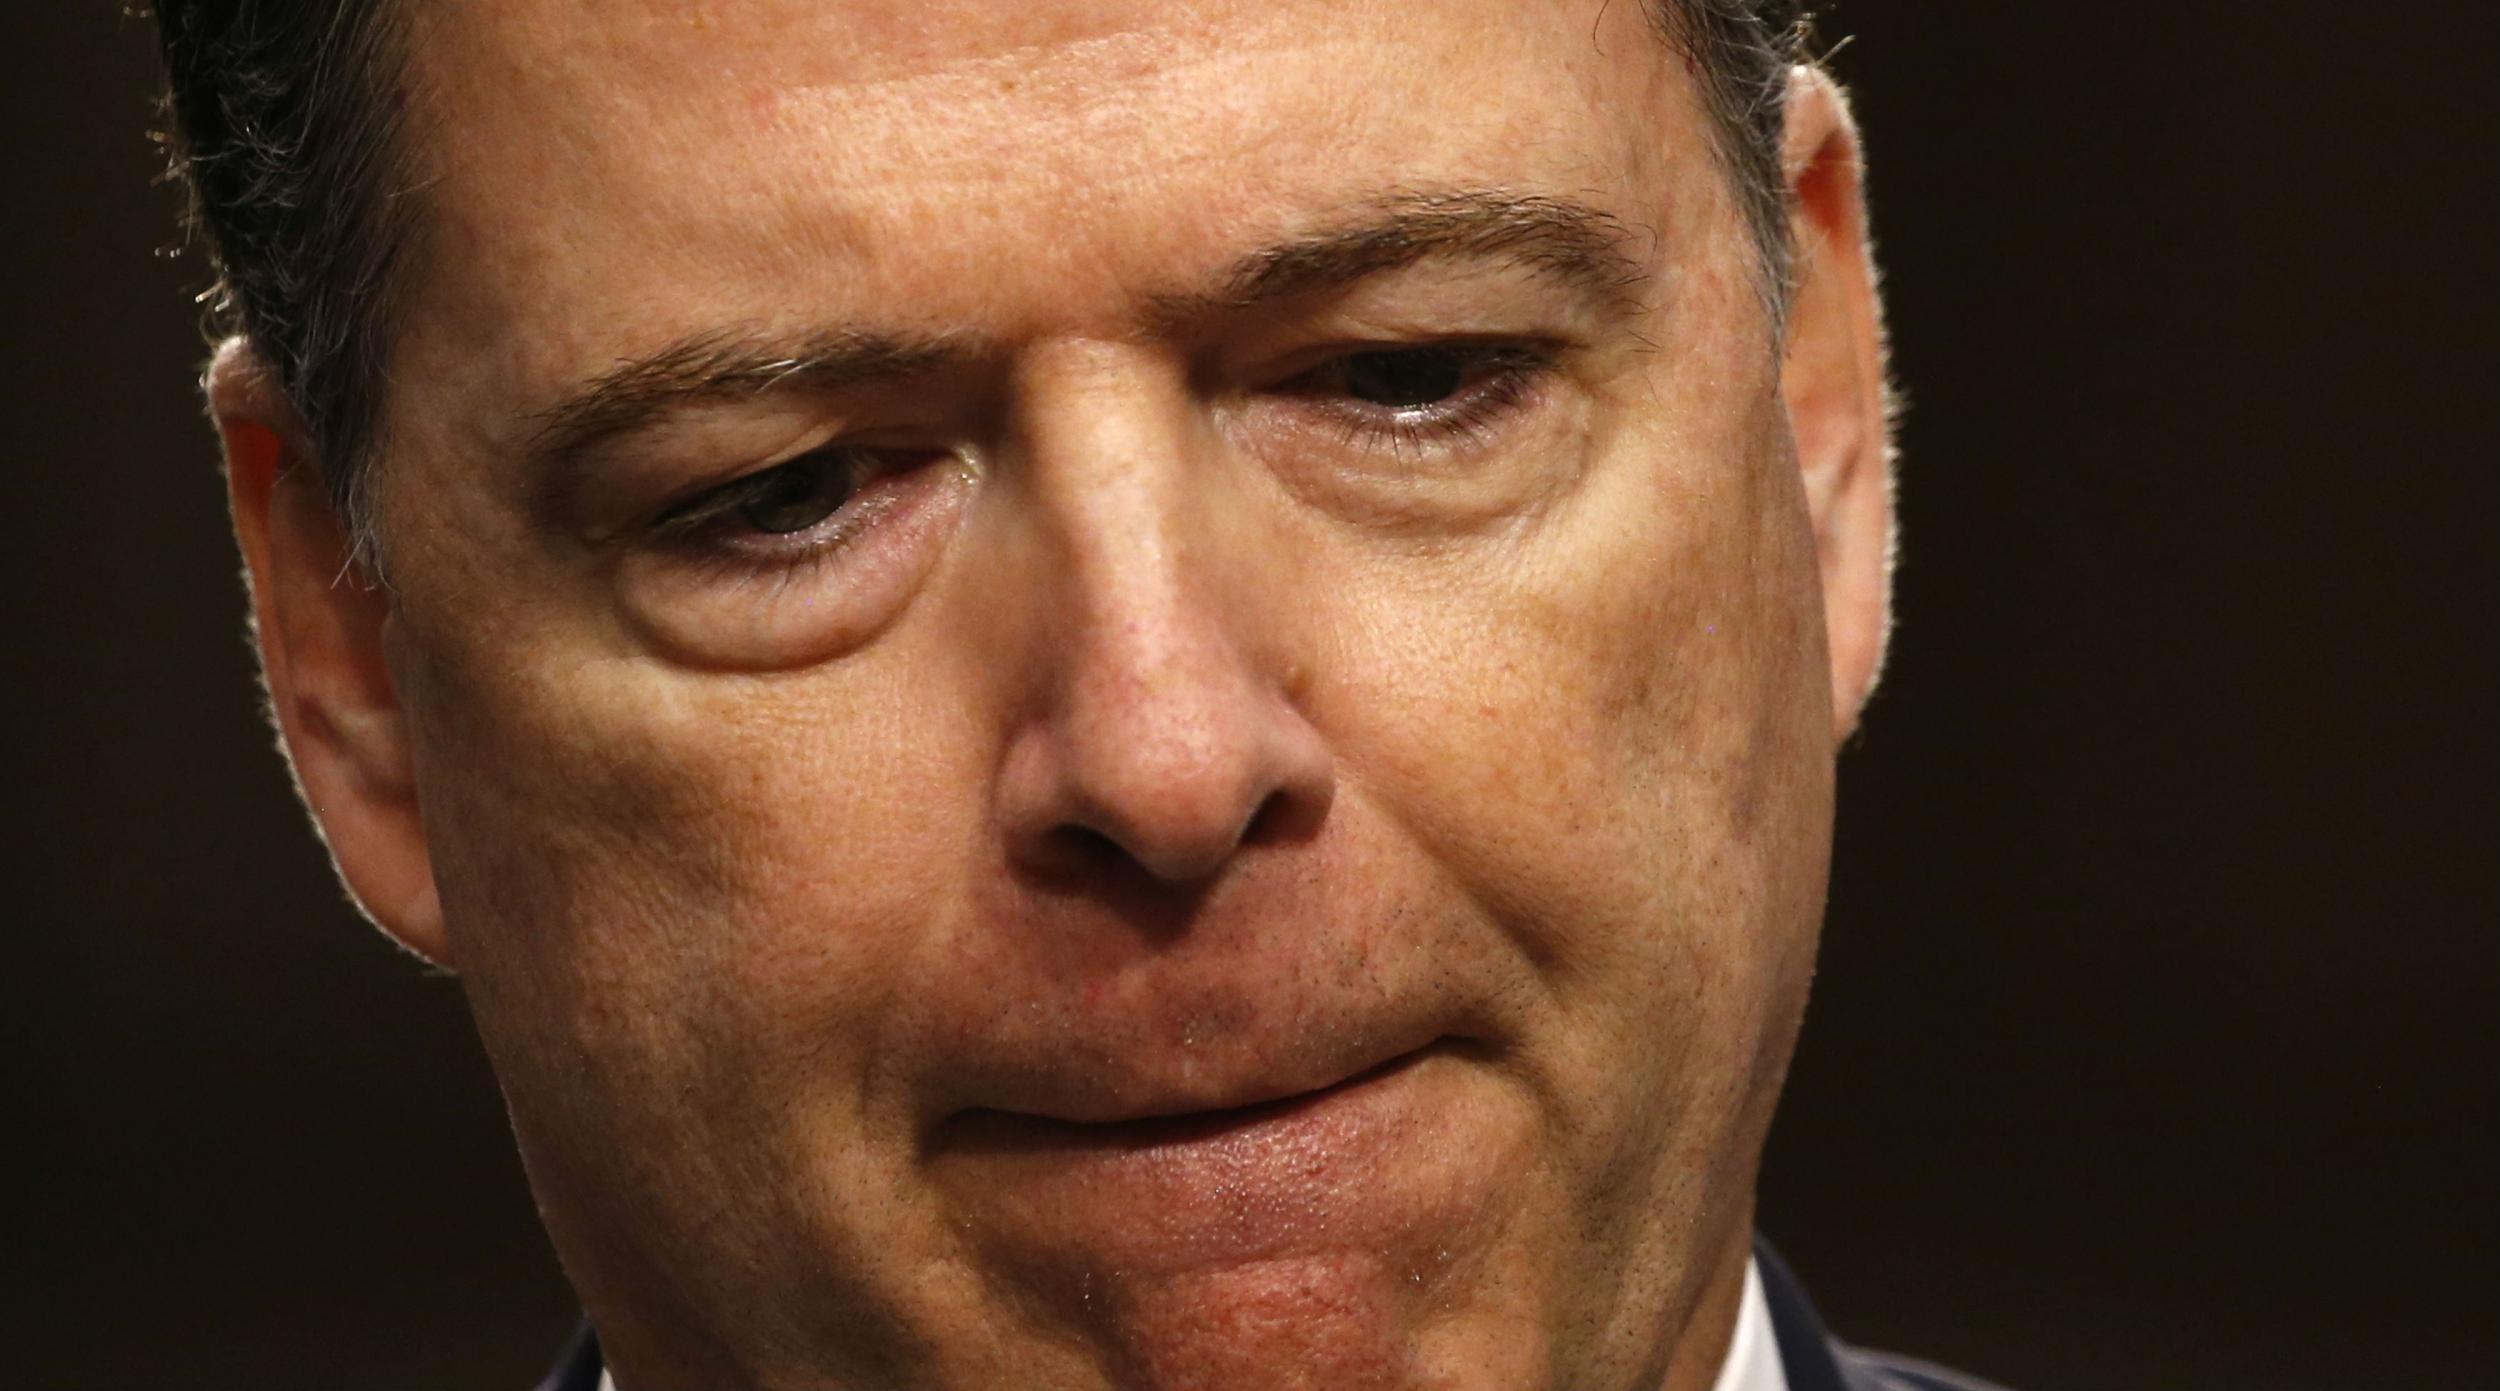 Mr Comey said he was inspired to release his memo after seeing Mr Trump's tweets